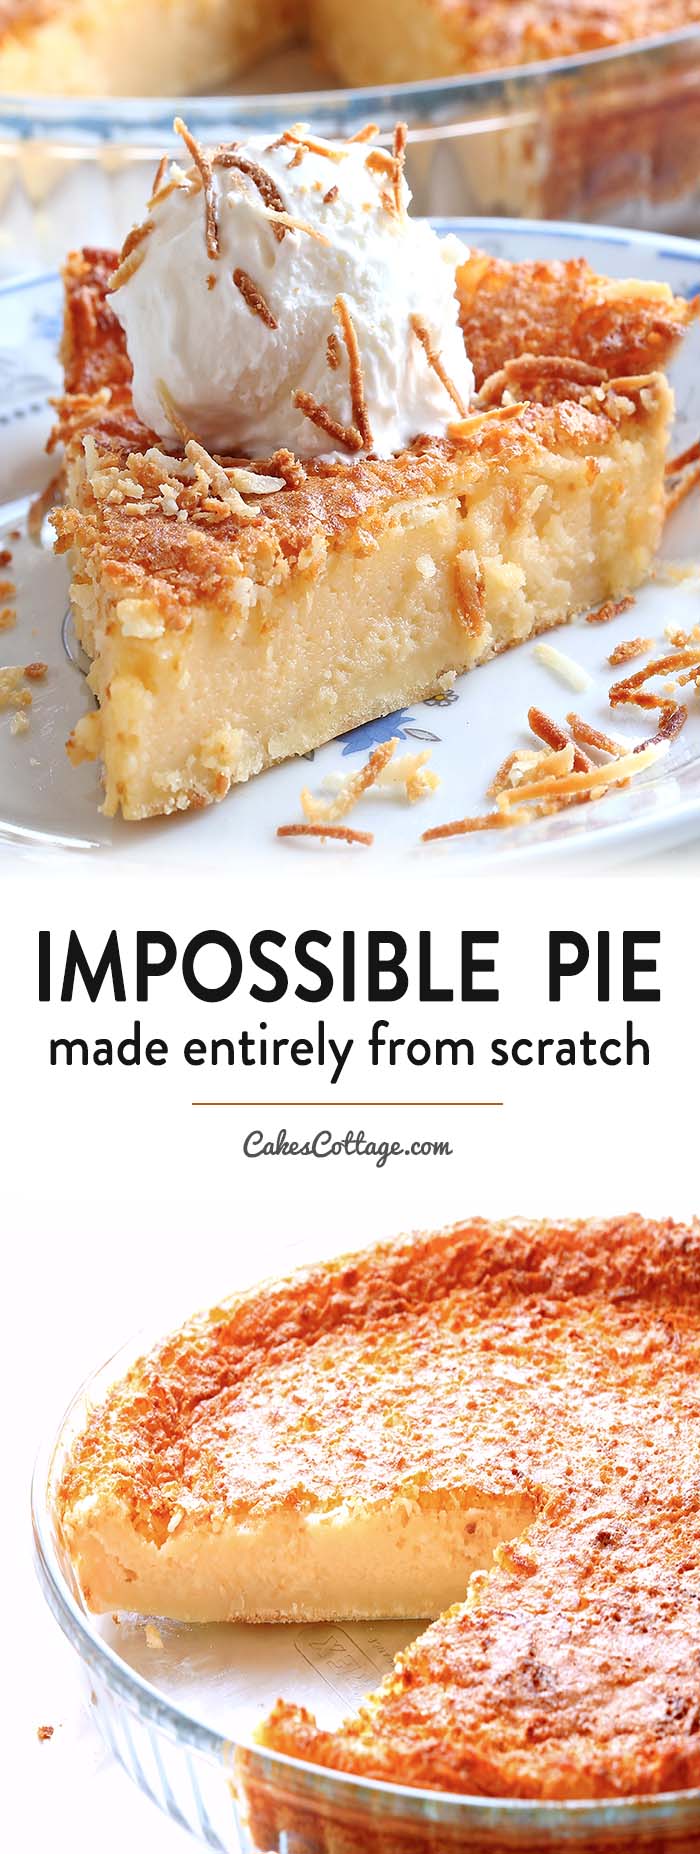 Impossible Pie is the easiest pie you will ever bake, it makes its own crust and two delicious layers while baking.!